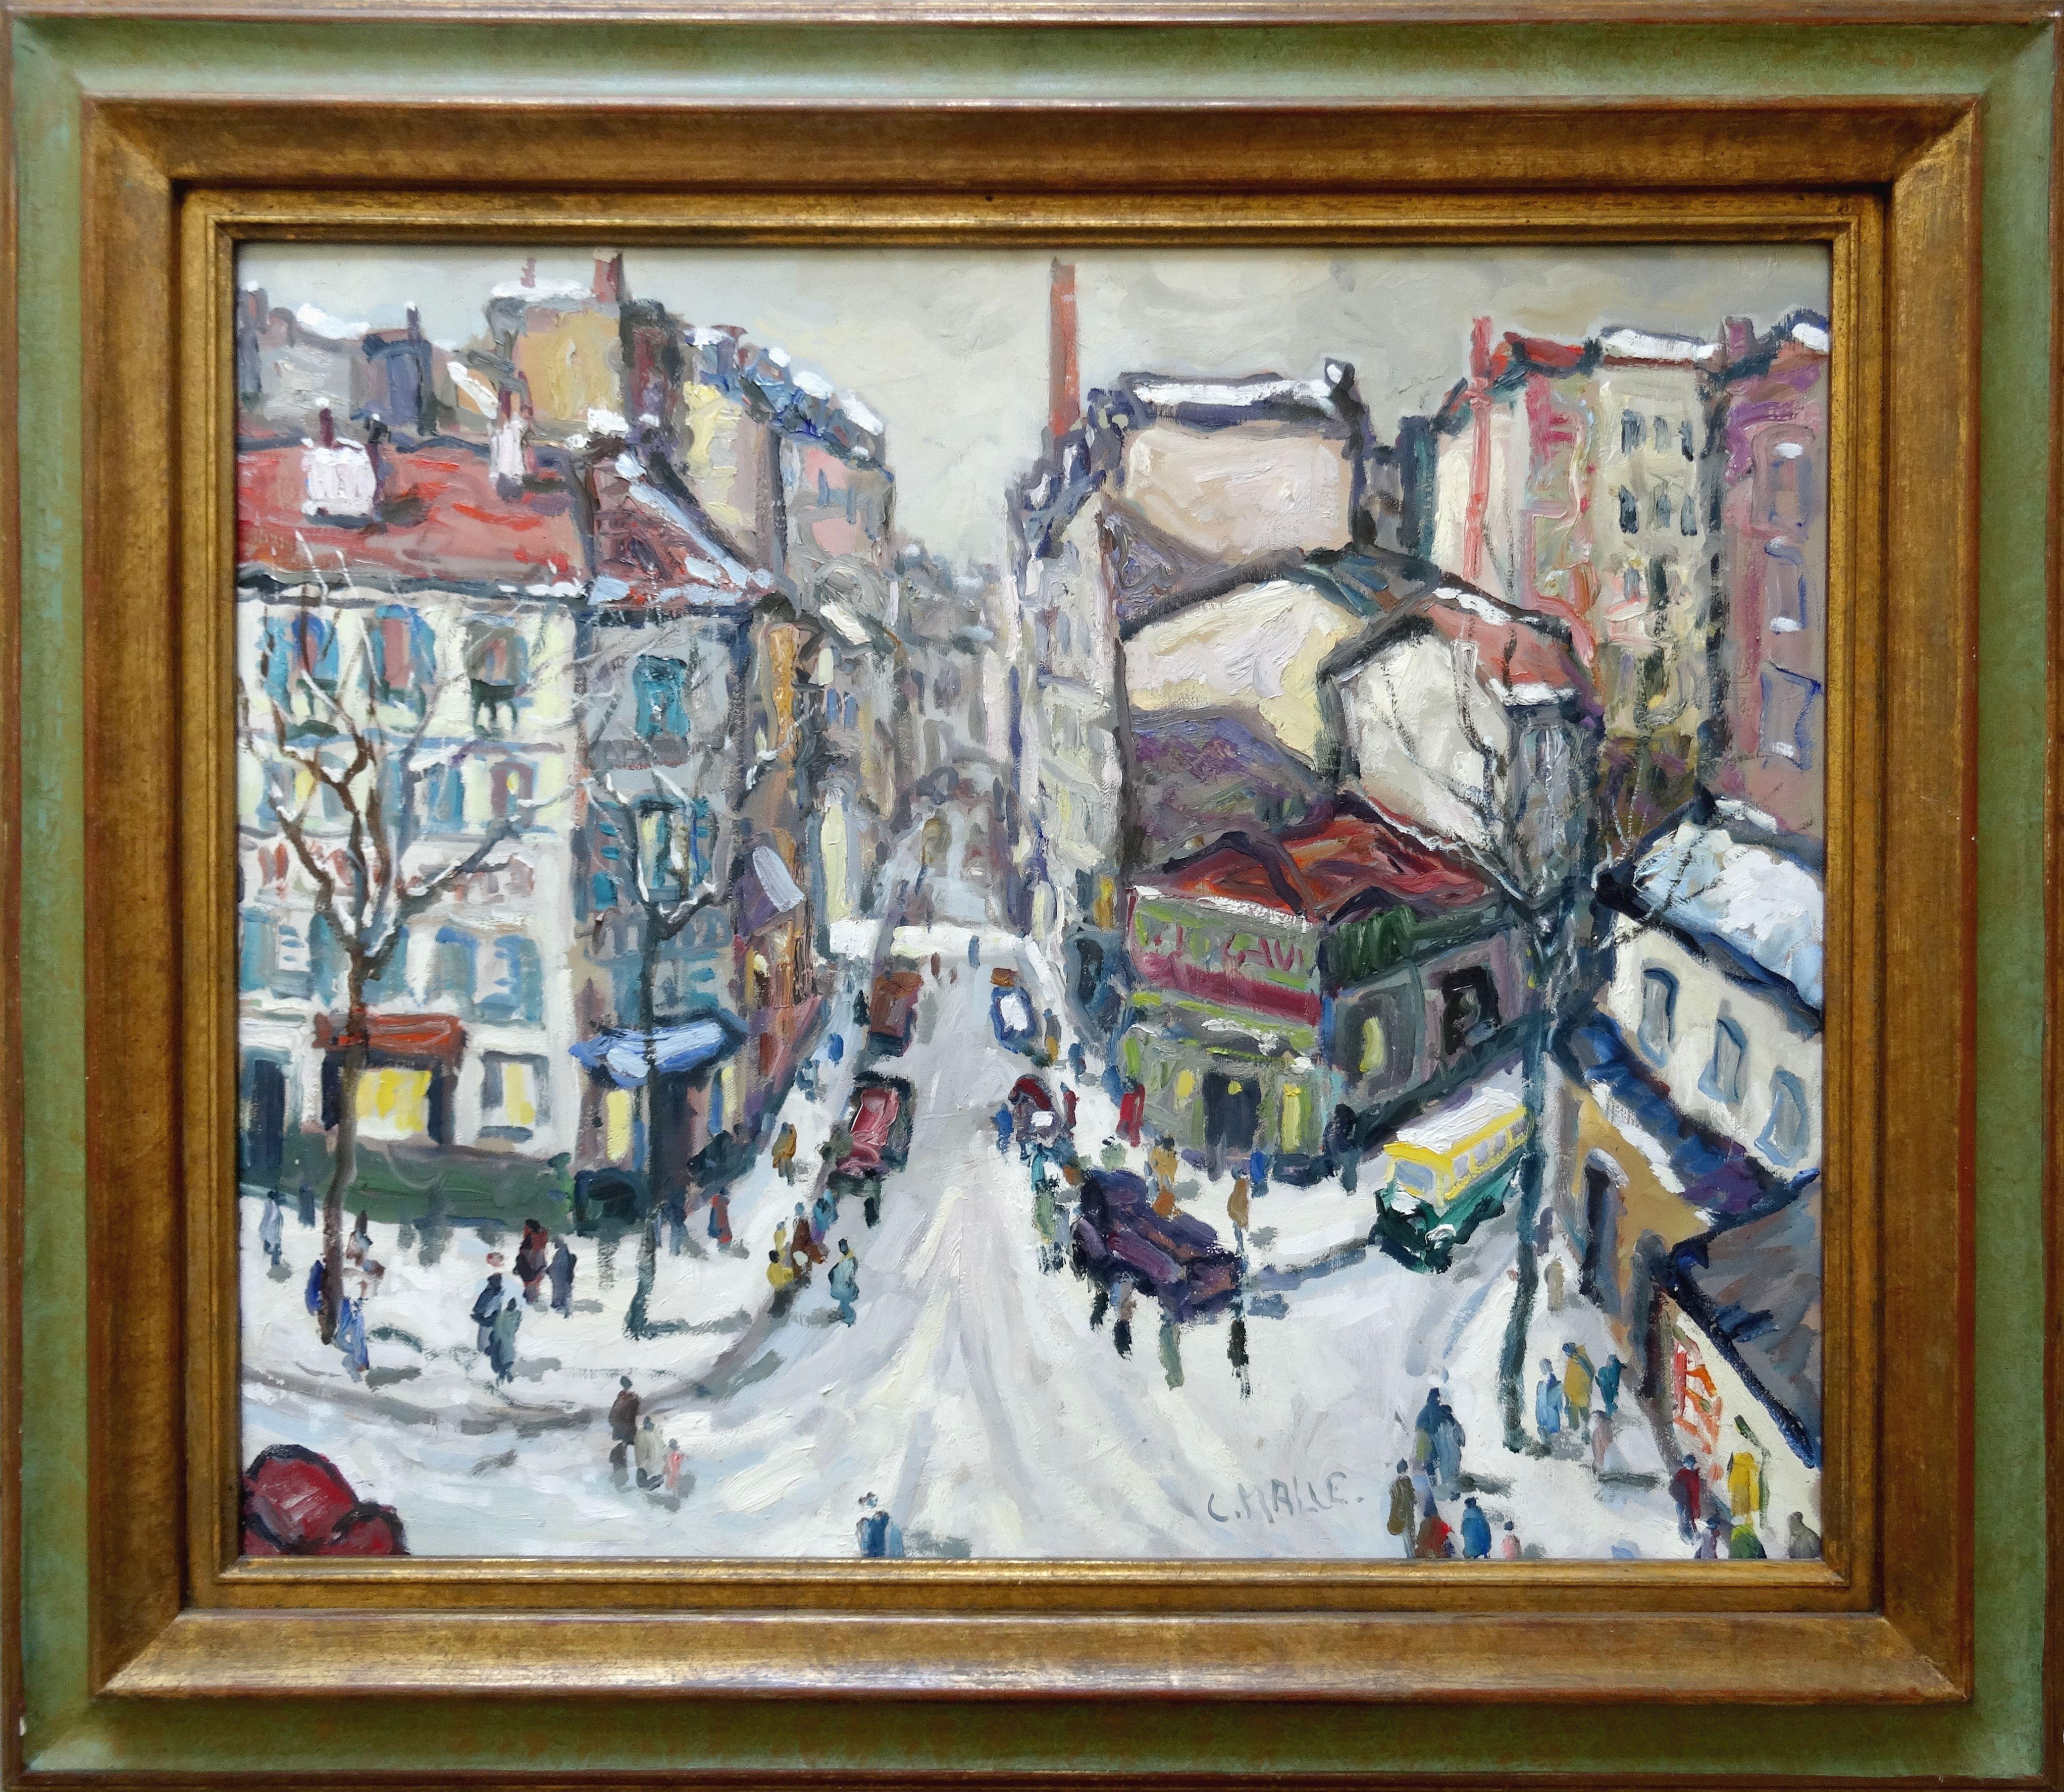 Entertainment at rue Clisson in Paris. Oil on canvas, 54x65 cm - Painting by Charles Malle